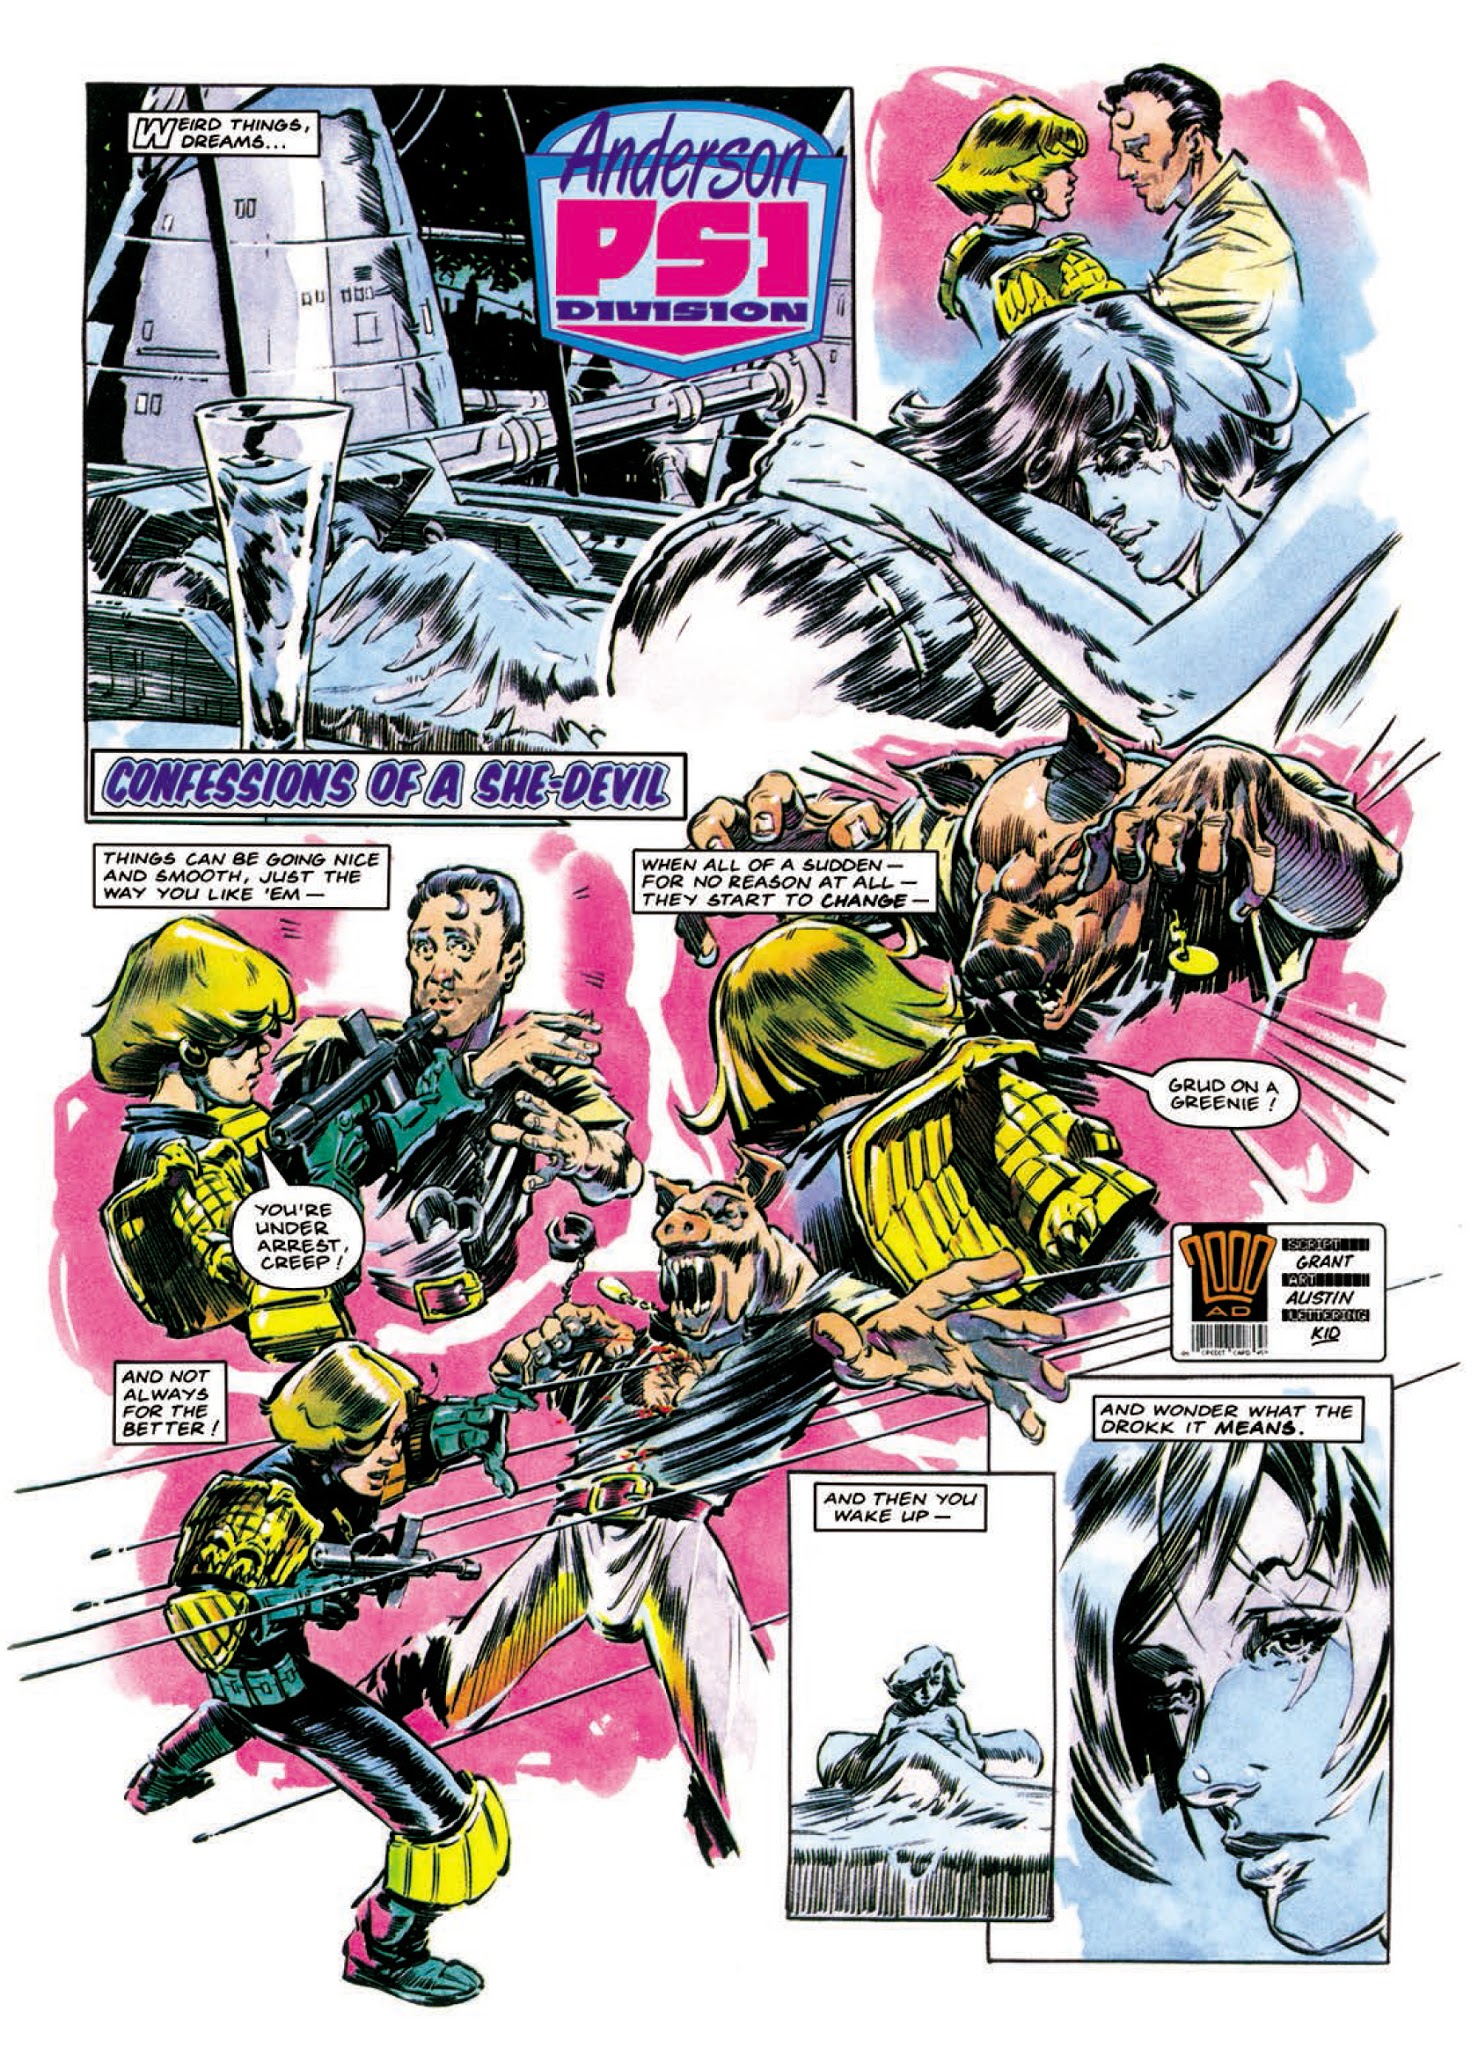 Read online Judge Anderson: The Psi Files comic -  Issue # TPB 3 - 274